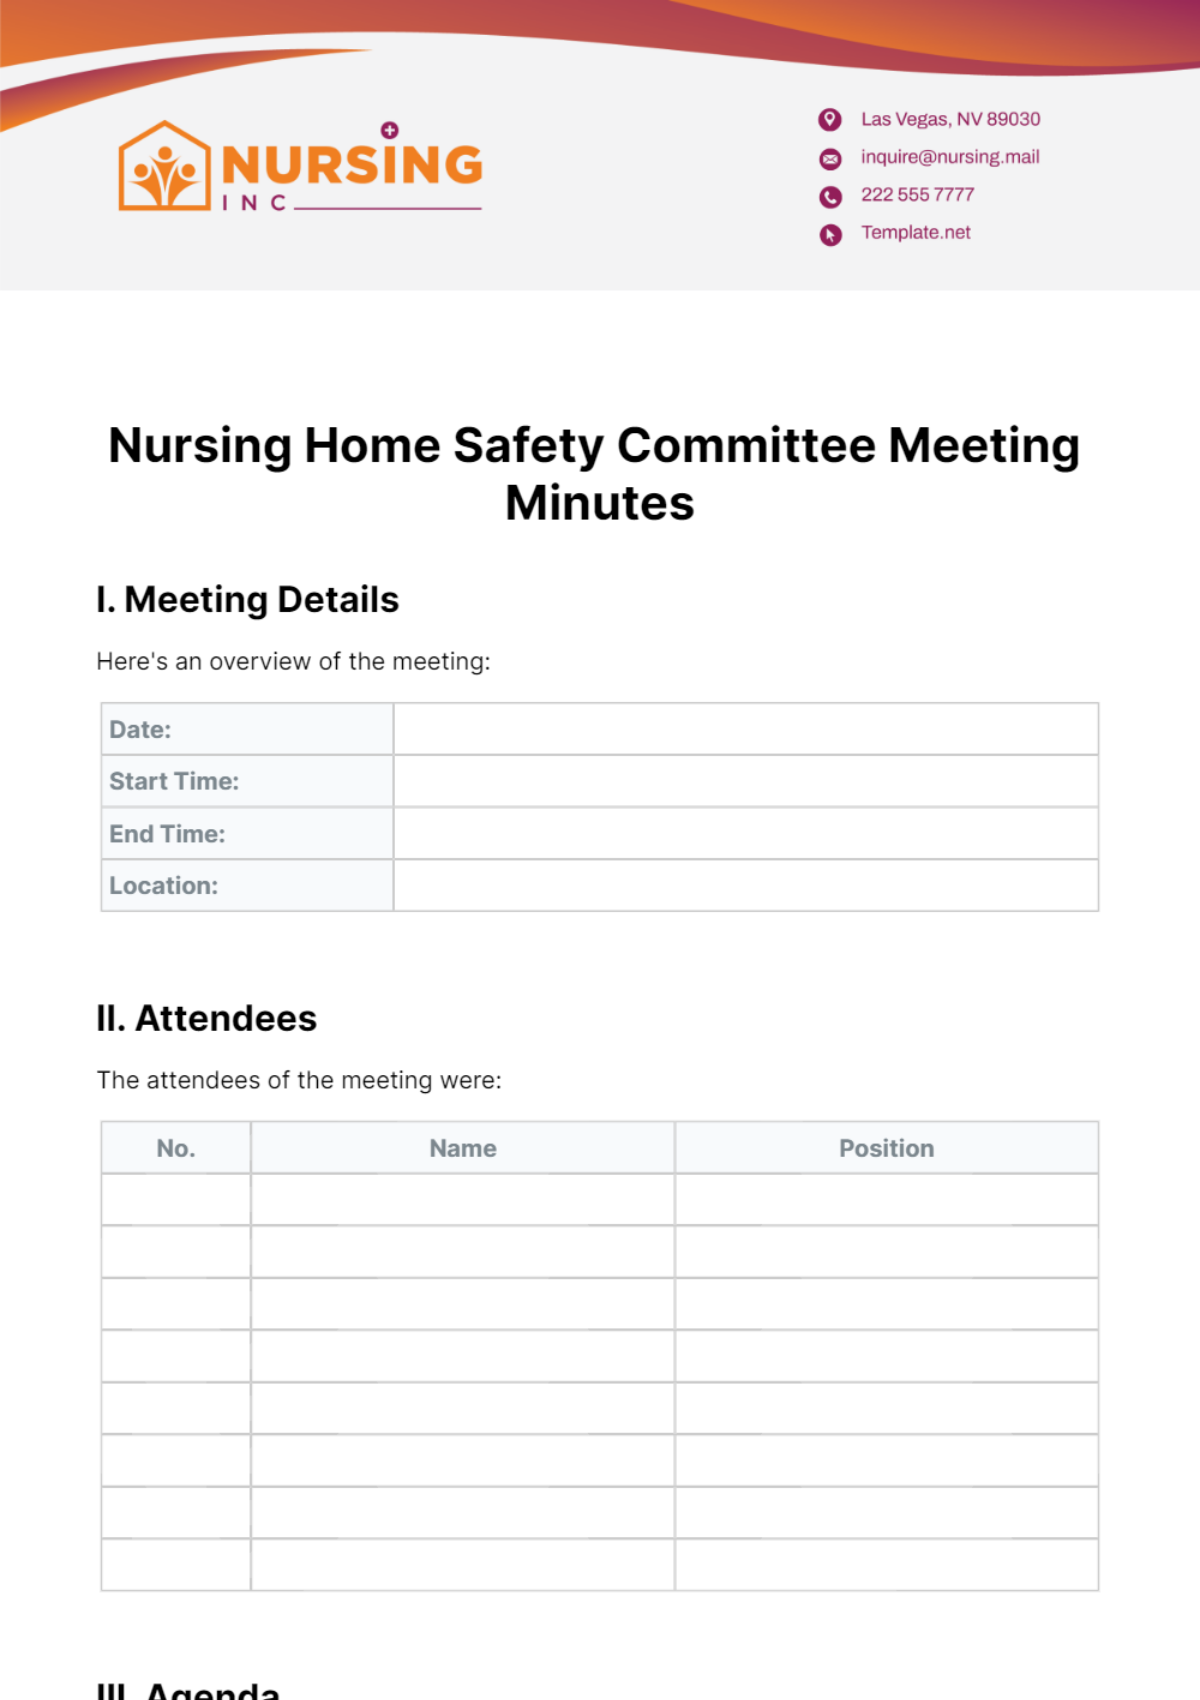 Nursing Home Safety Committee Meeting Minutes Template